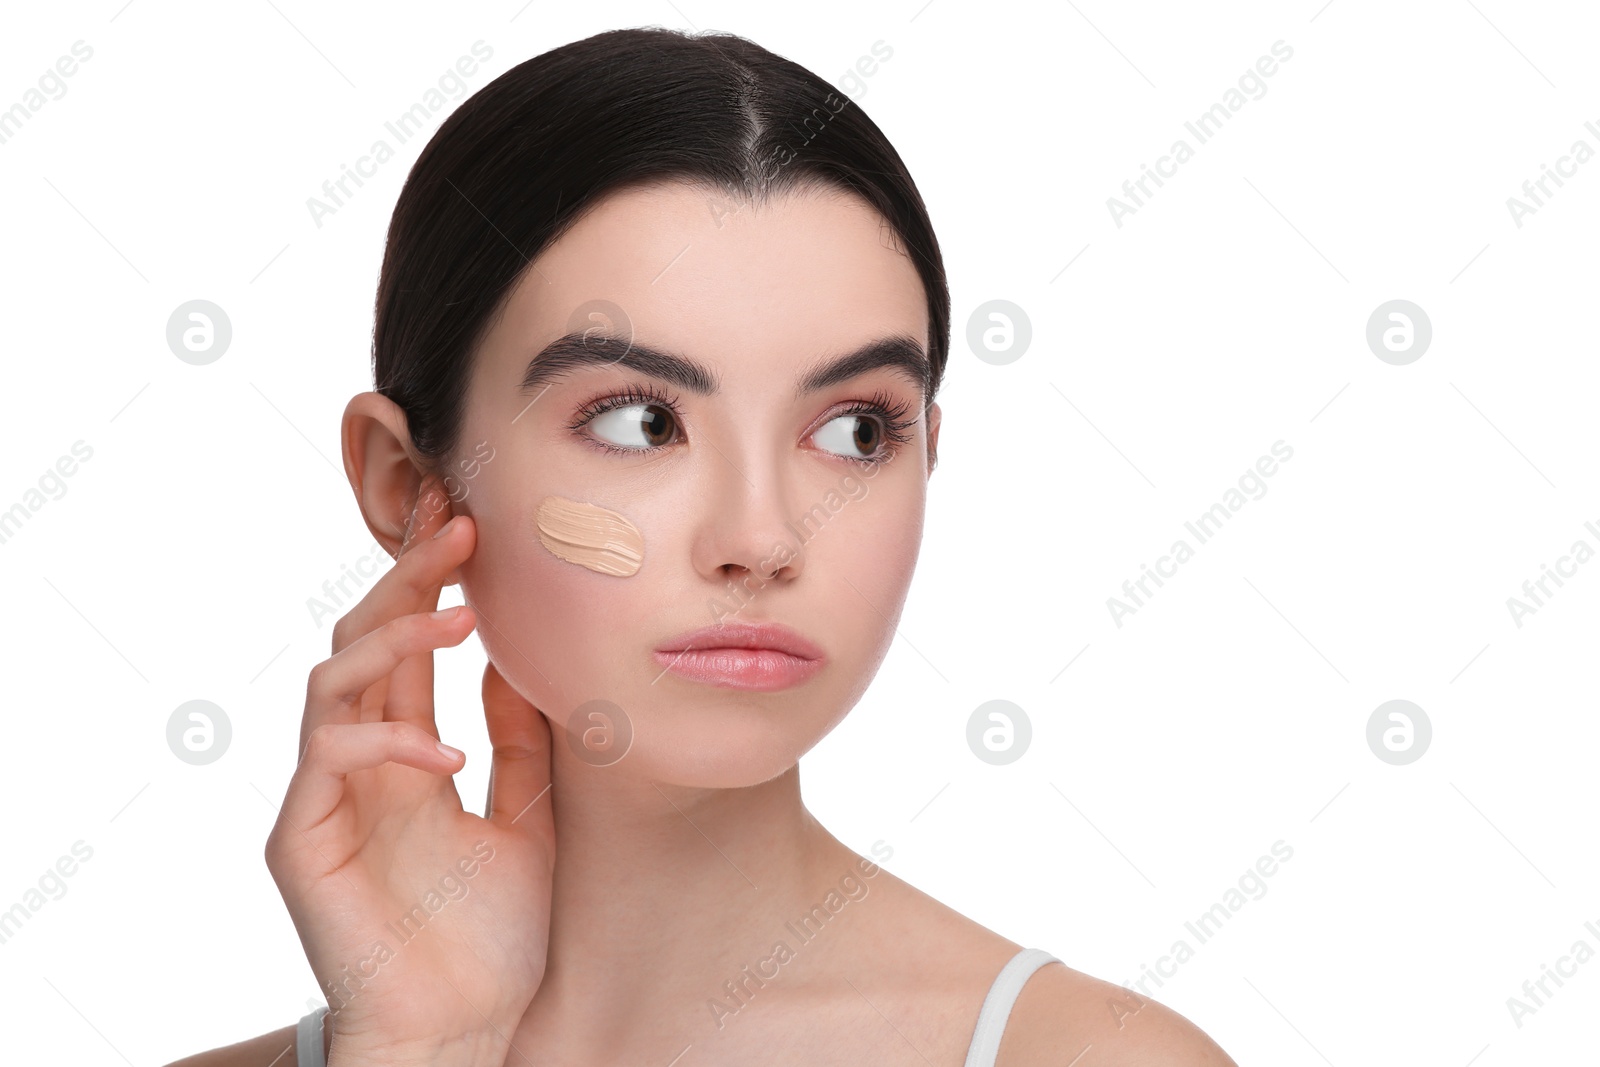 Photo of Teenage girl with swatch of foundation on face against white background